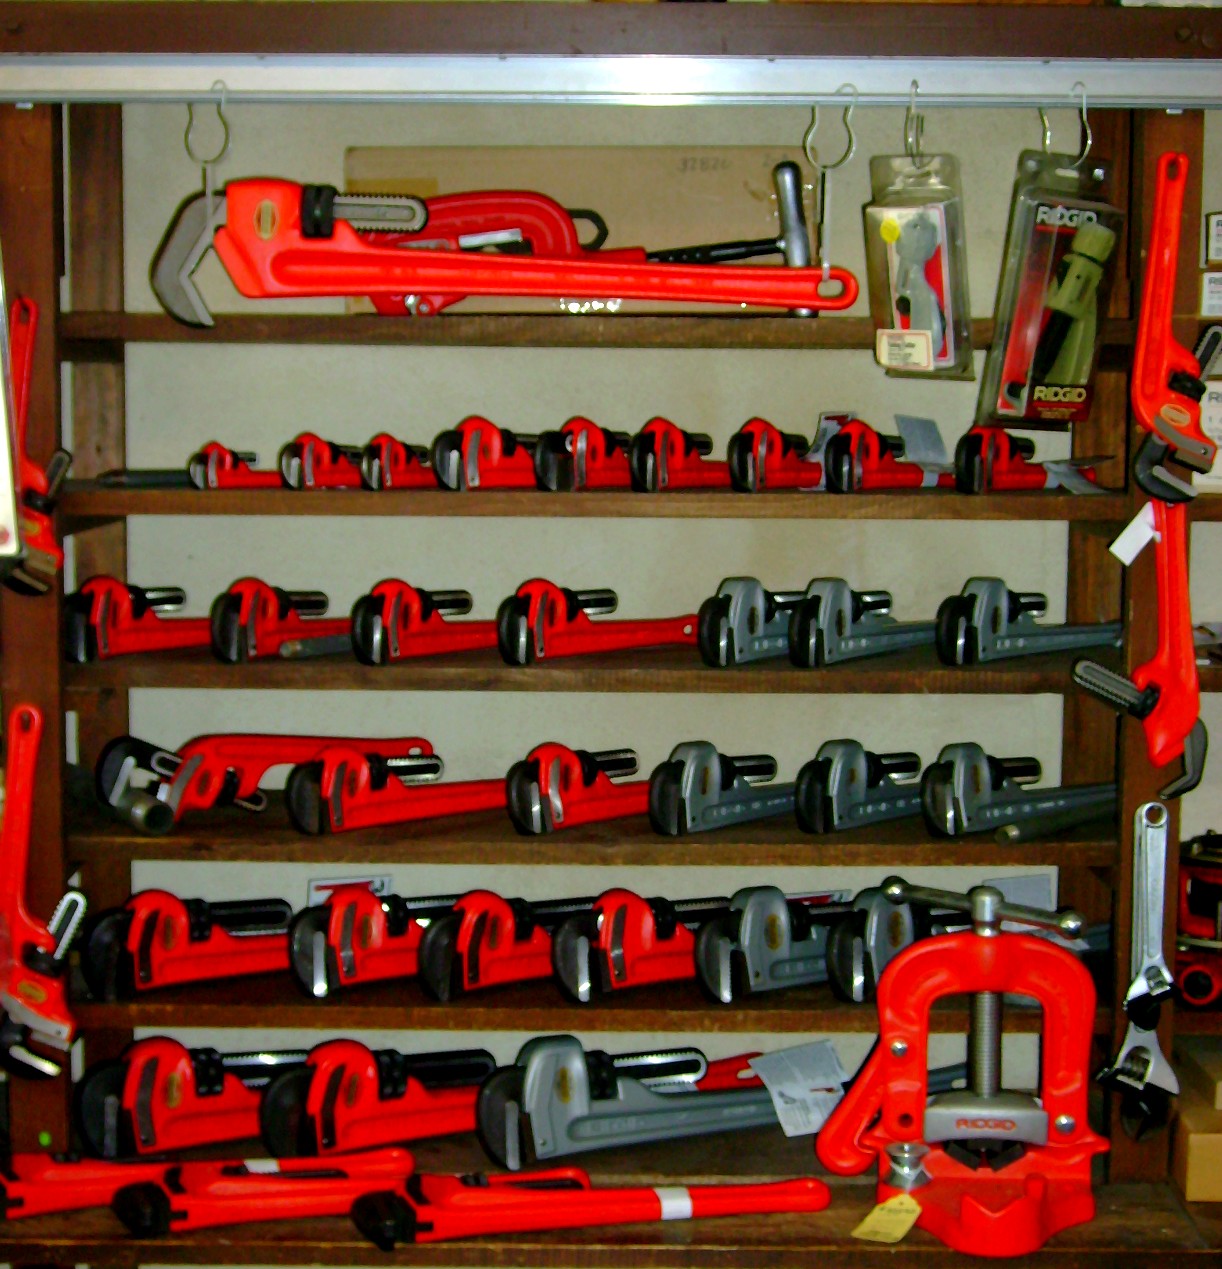 Ridgid Pipe Wrench Display In Stock